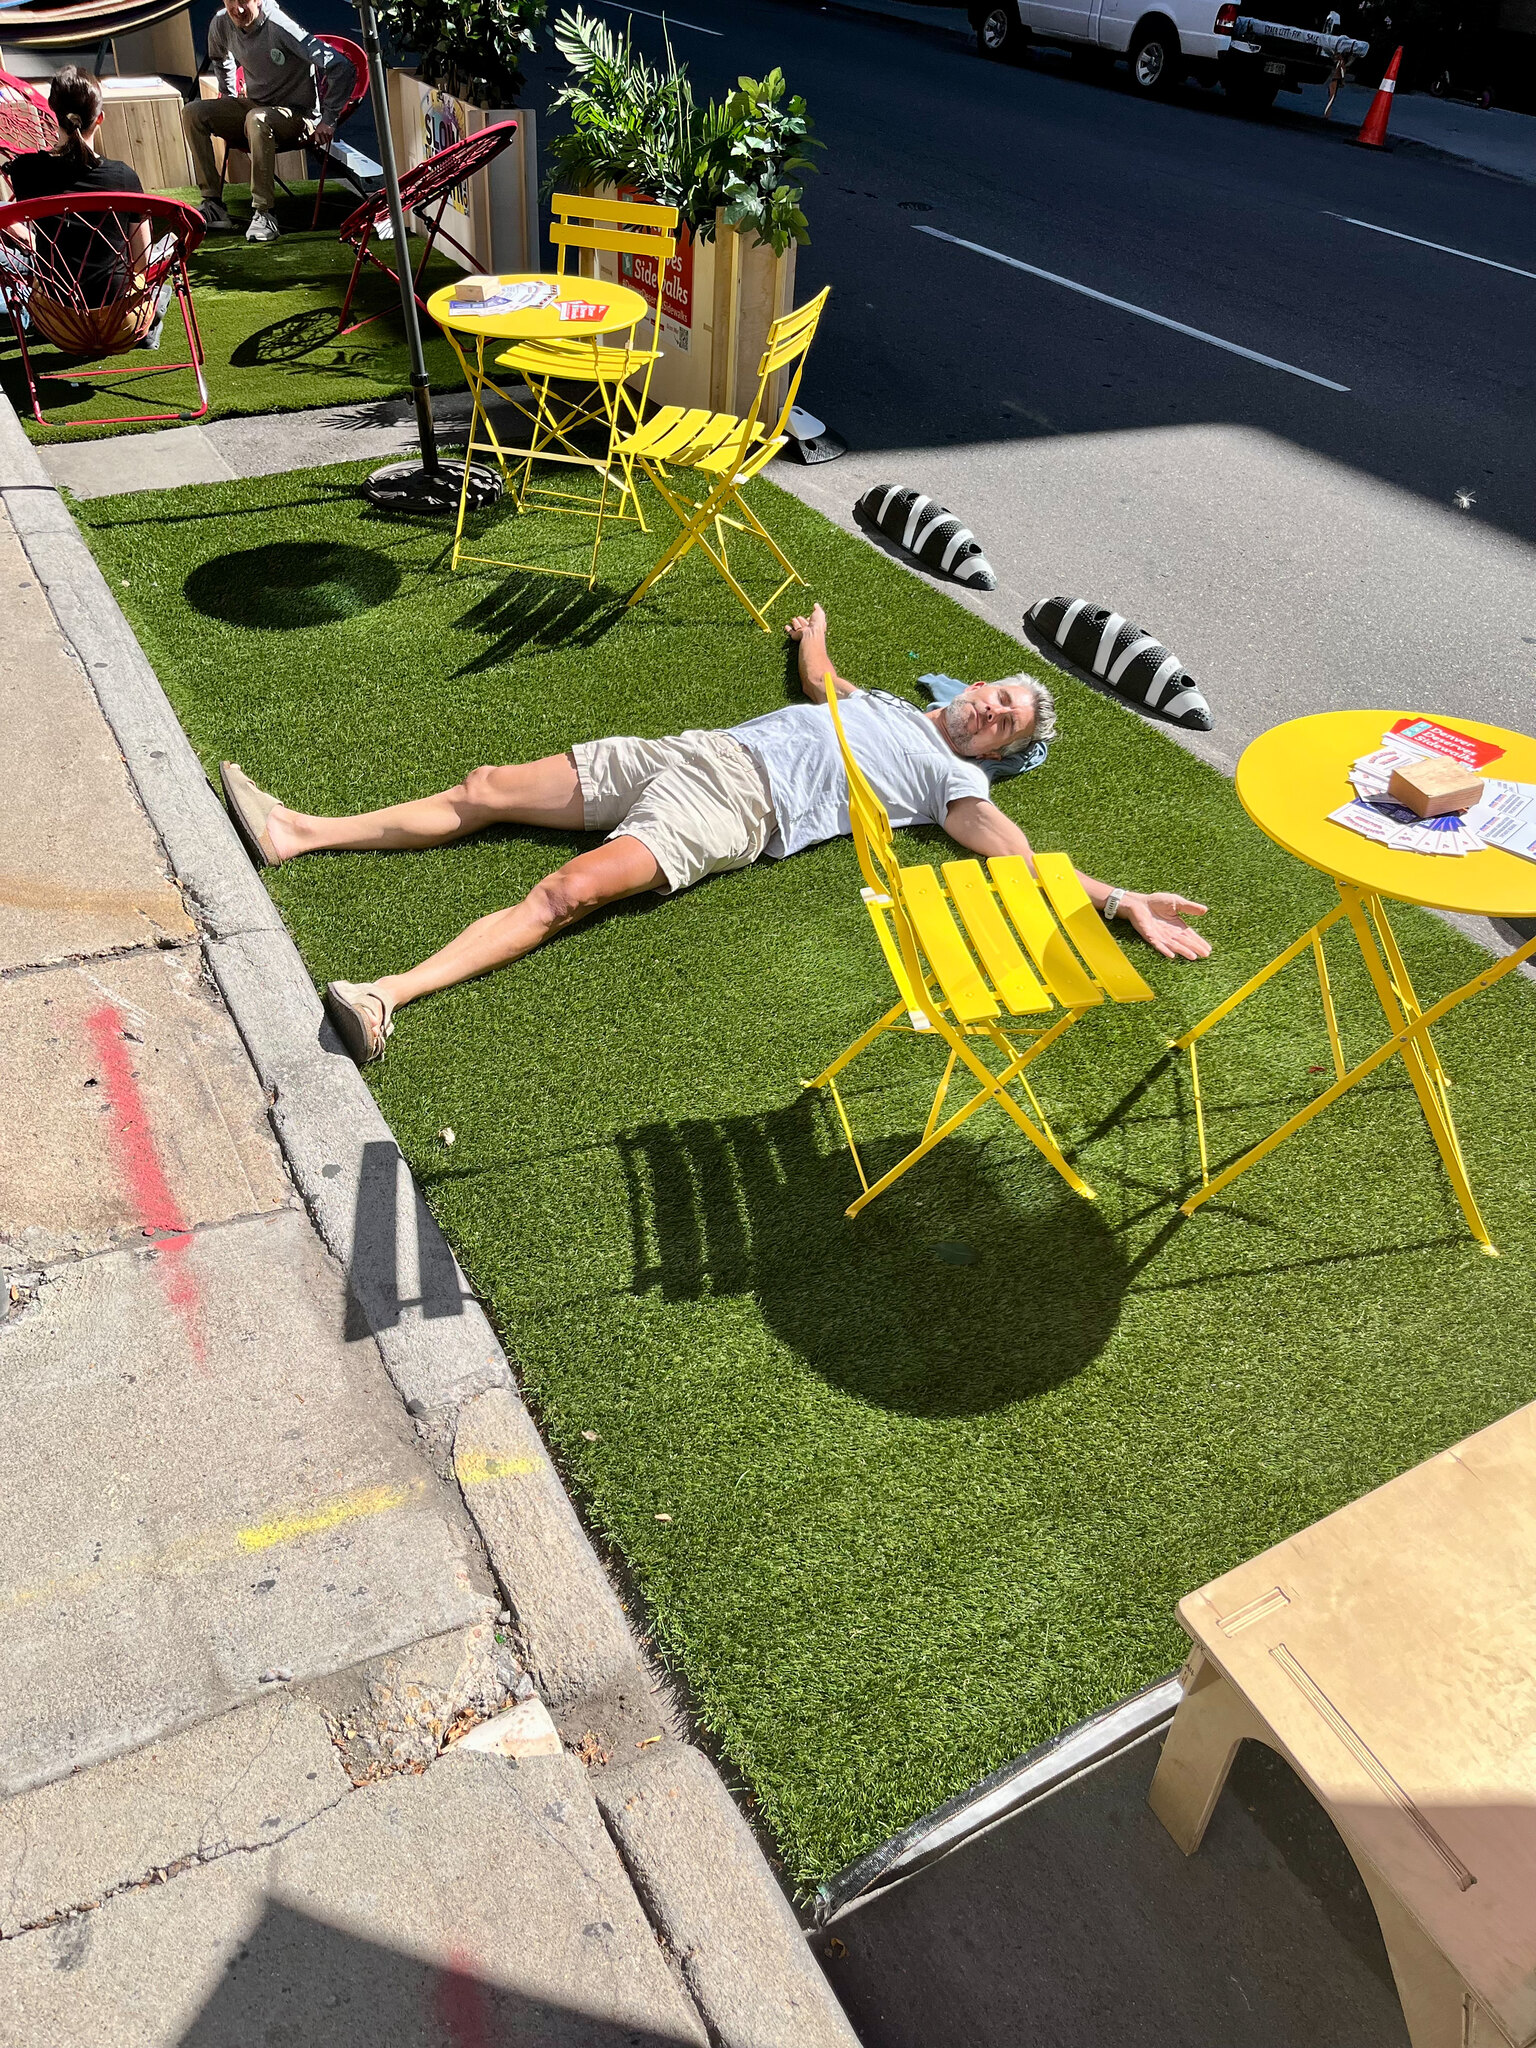 Pete Piccolo, a white man, lies flat on his back on a piece of turf in a street parking space that also has two small tables and chairs in it.